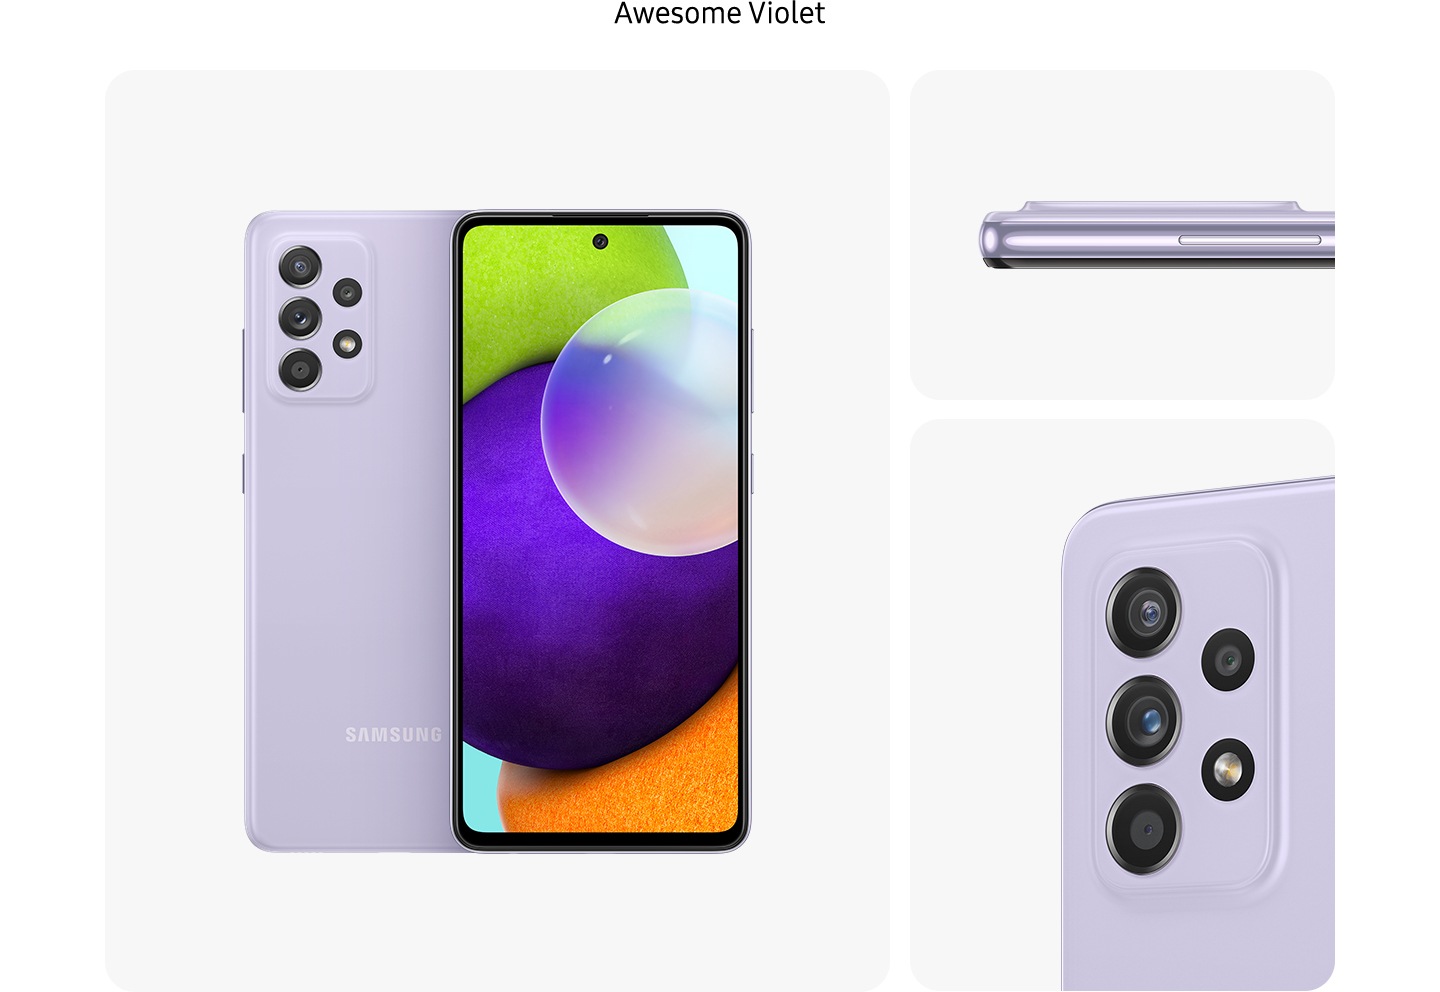 Galaxy A52 in Awesome Violet, seen from multiple angles to show the design: rear, front, side and close-up on the rear camera.